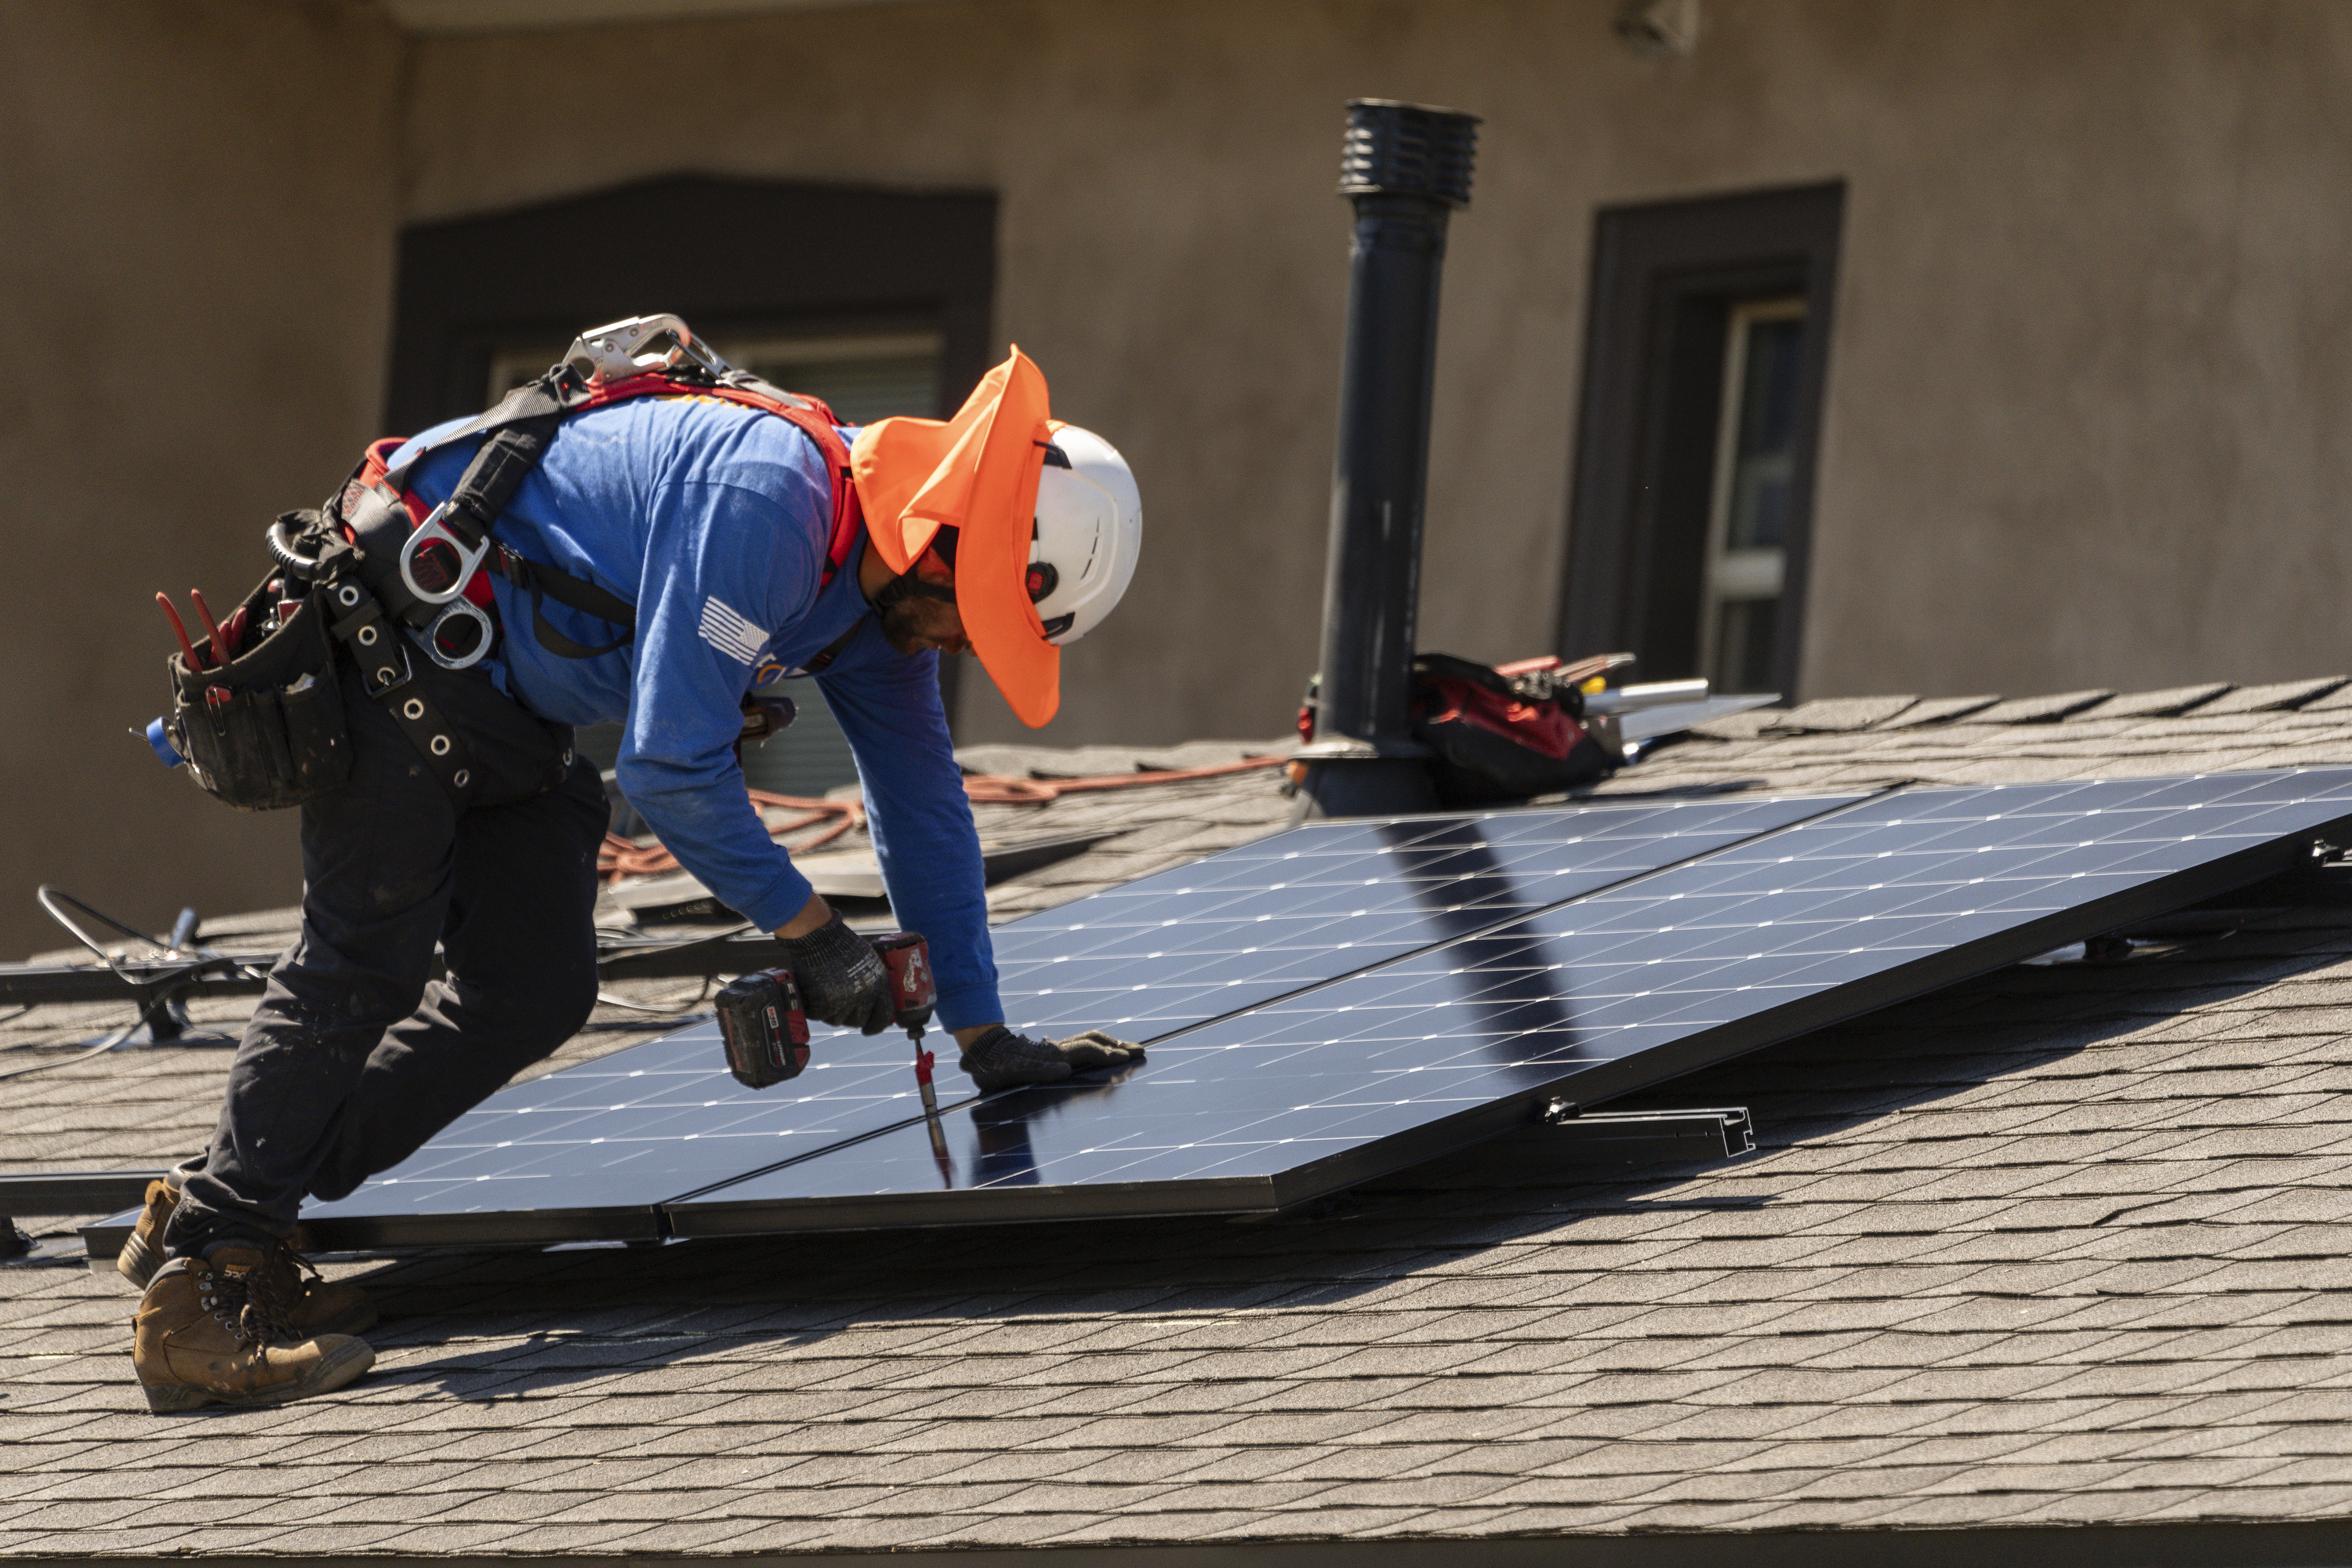 rooftop solar panels are flooding california’s grid. that’s a problem.